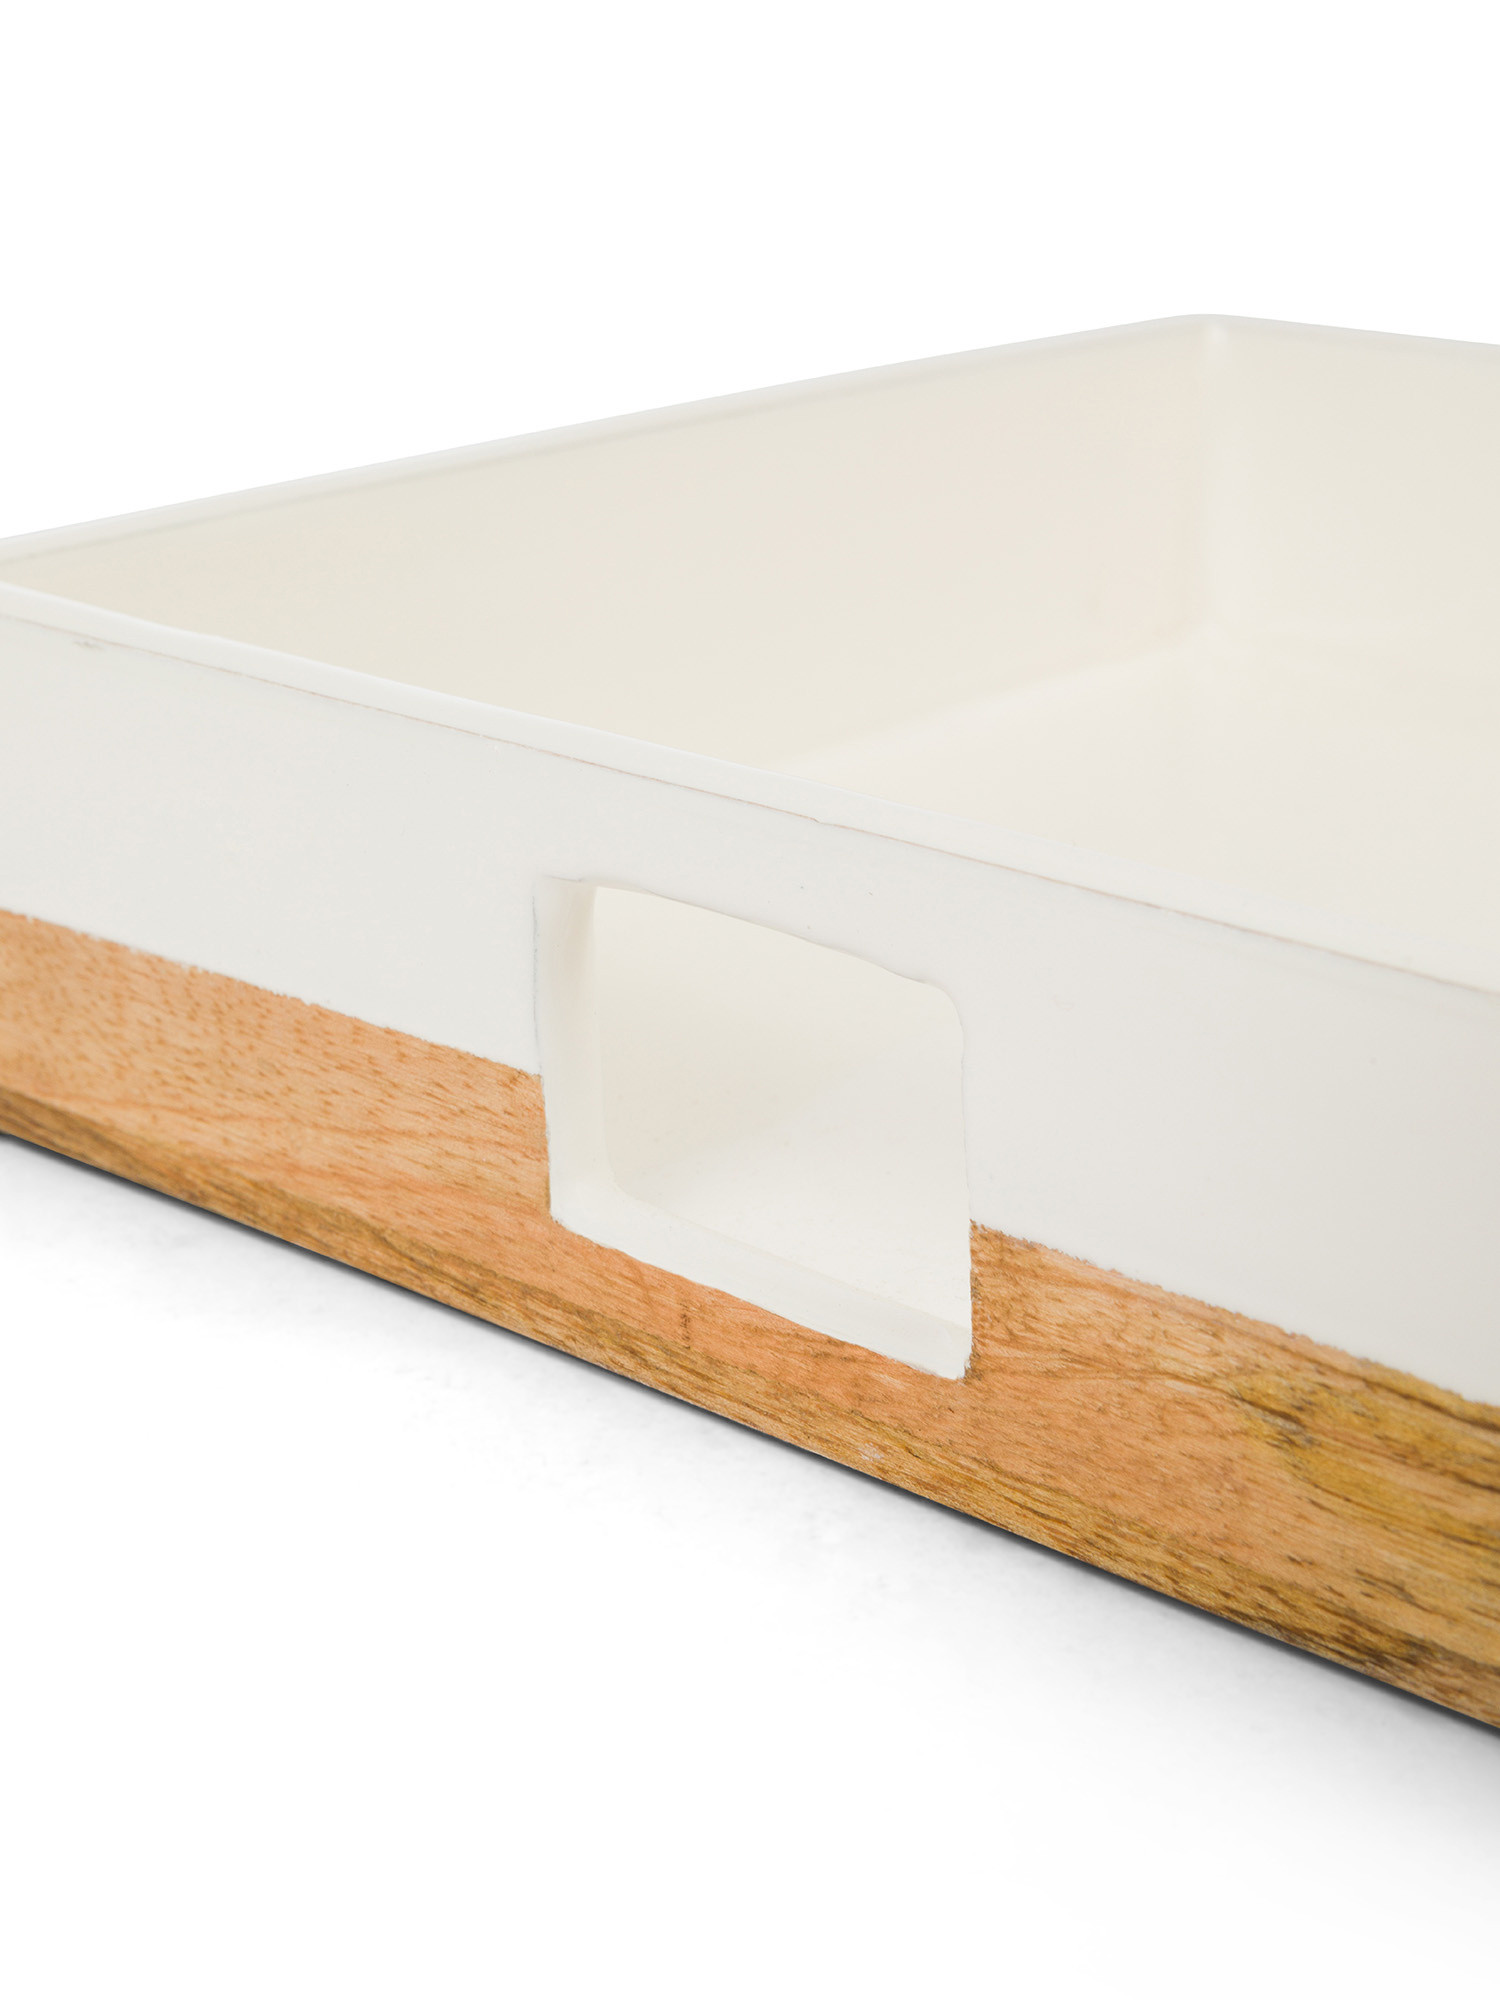 Wooden tray, White, large image number 1